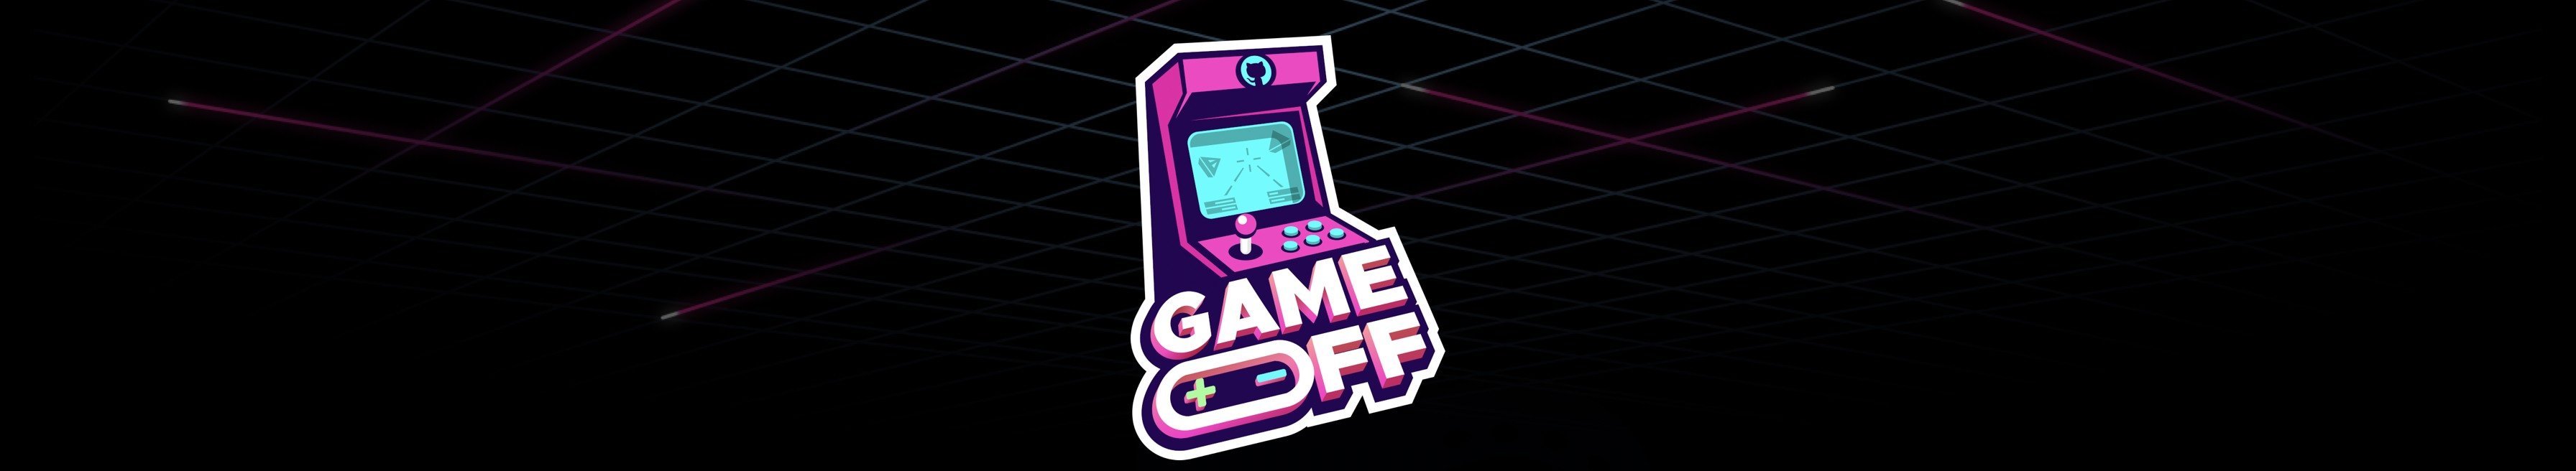 Build a game this November with Game Off 2022 - The GitHub Blog